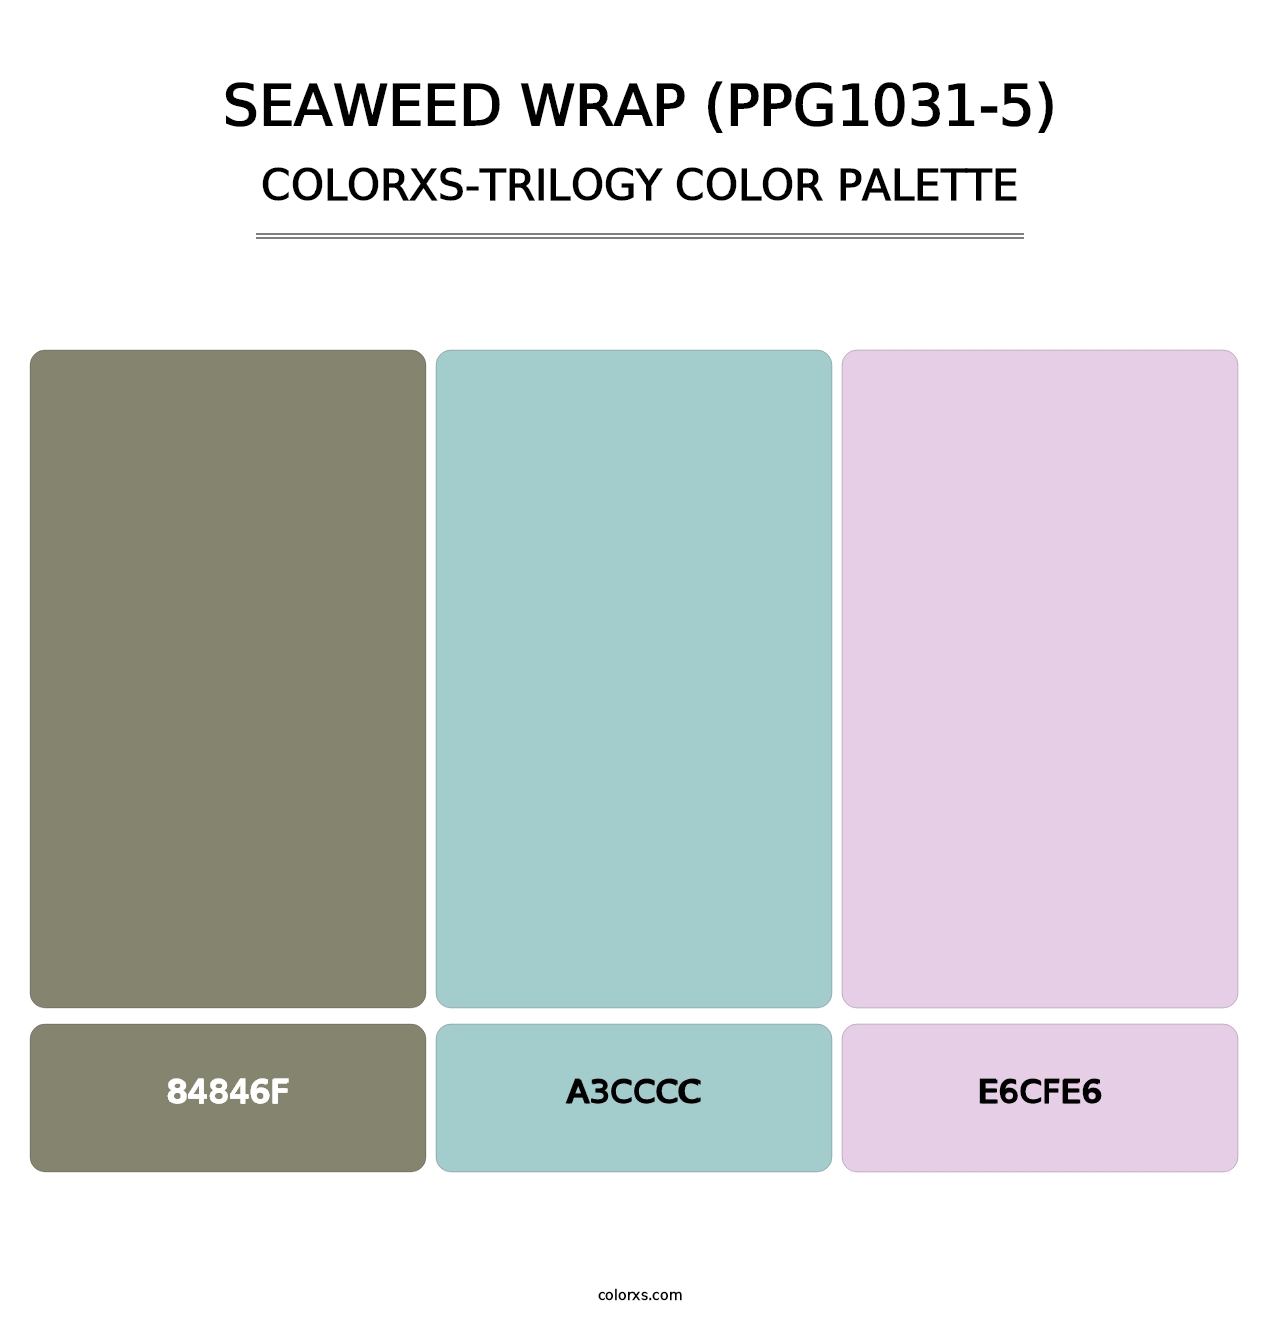 Seaweed Wrap (PPG1031-5) - Colorxs Trilogy Palette